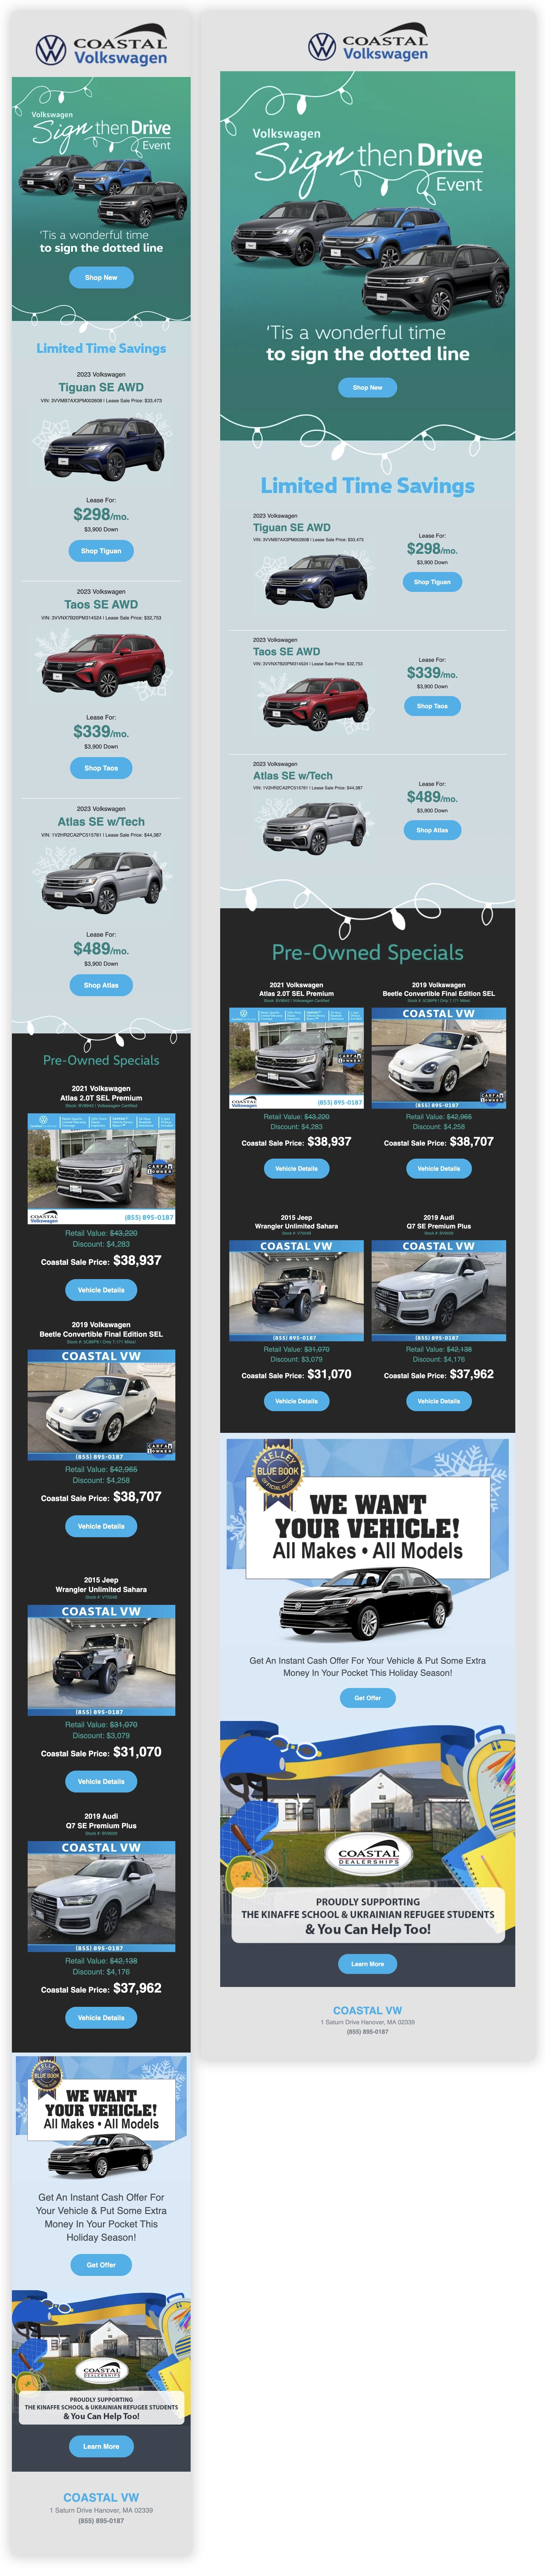 Volkswagen Sign then Drive email template